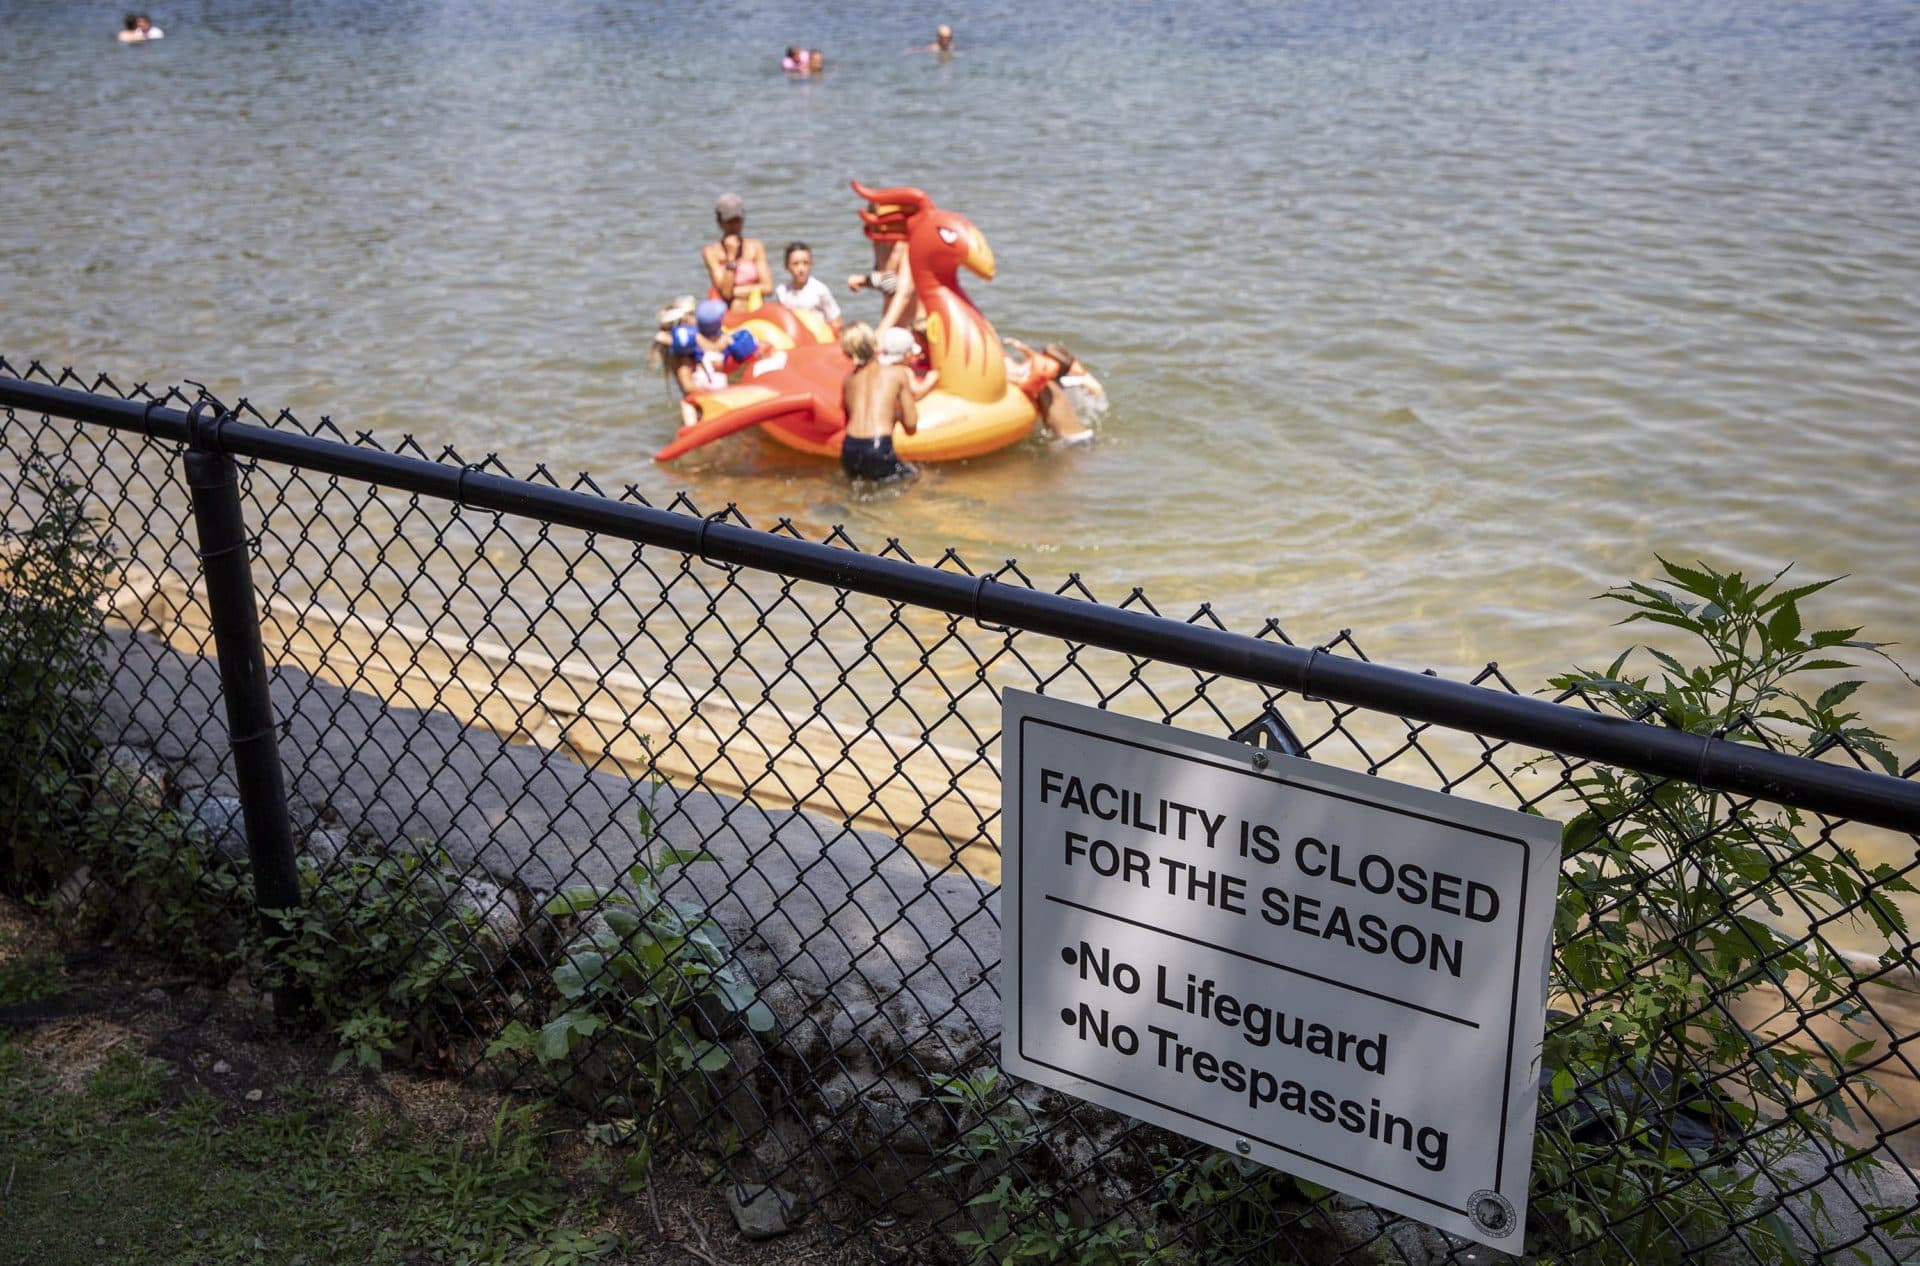 Although the Gil Champagne bathhouse is closed for the season due to COVID-19, people can still head down to Crystal Lake to cool off. (Robin Lubbock/WBUR)